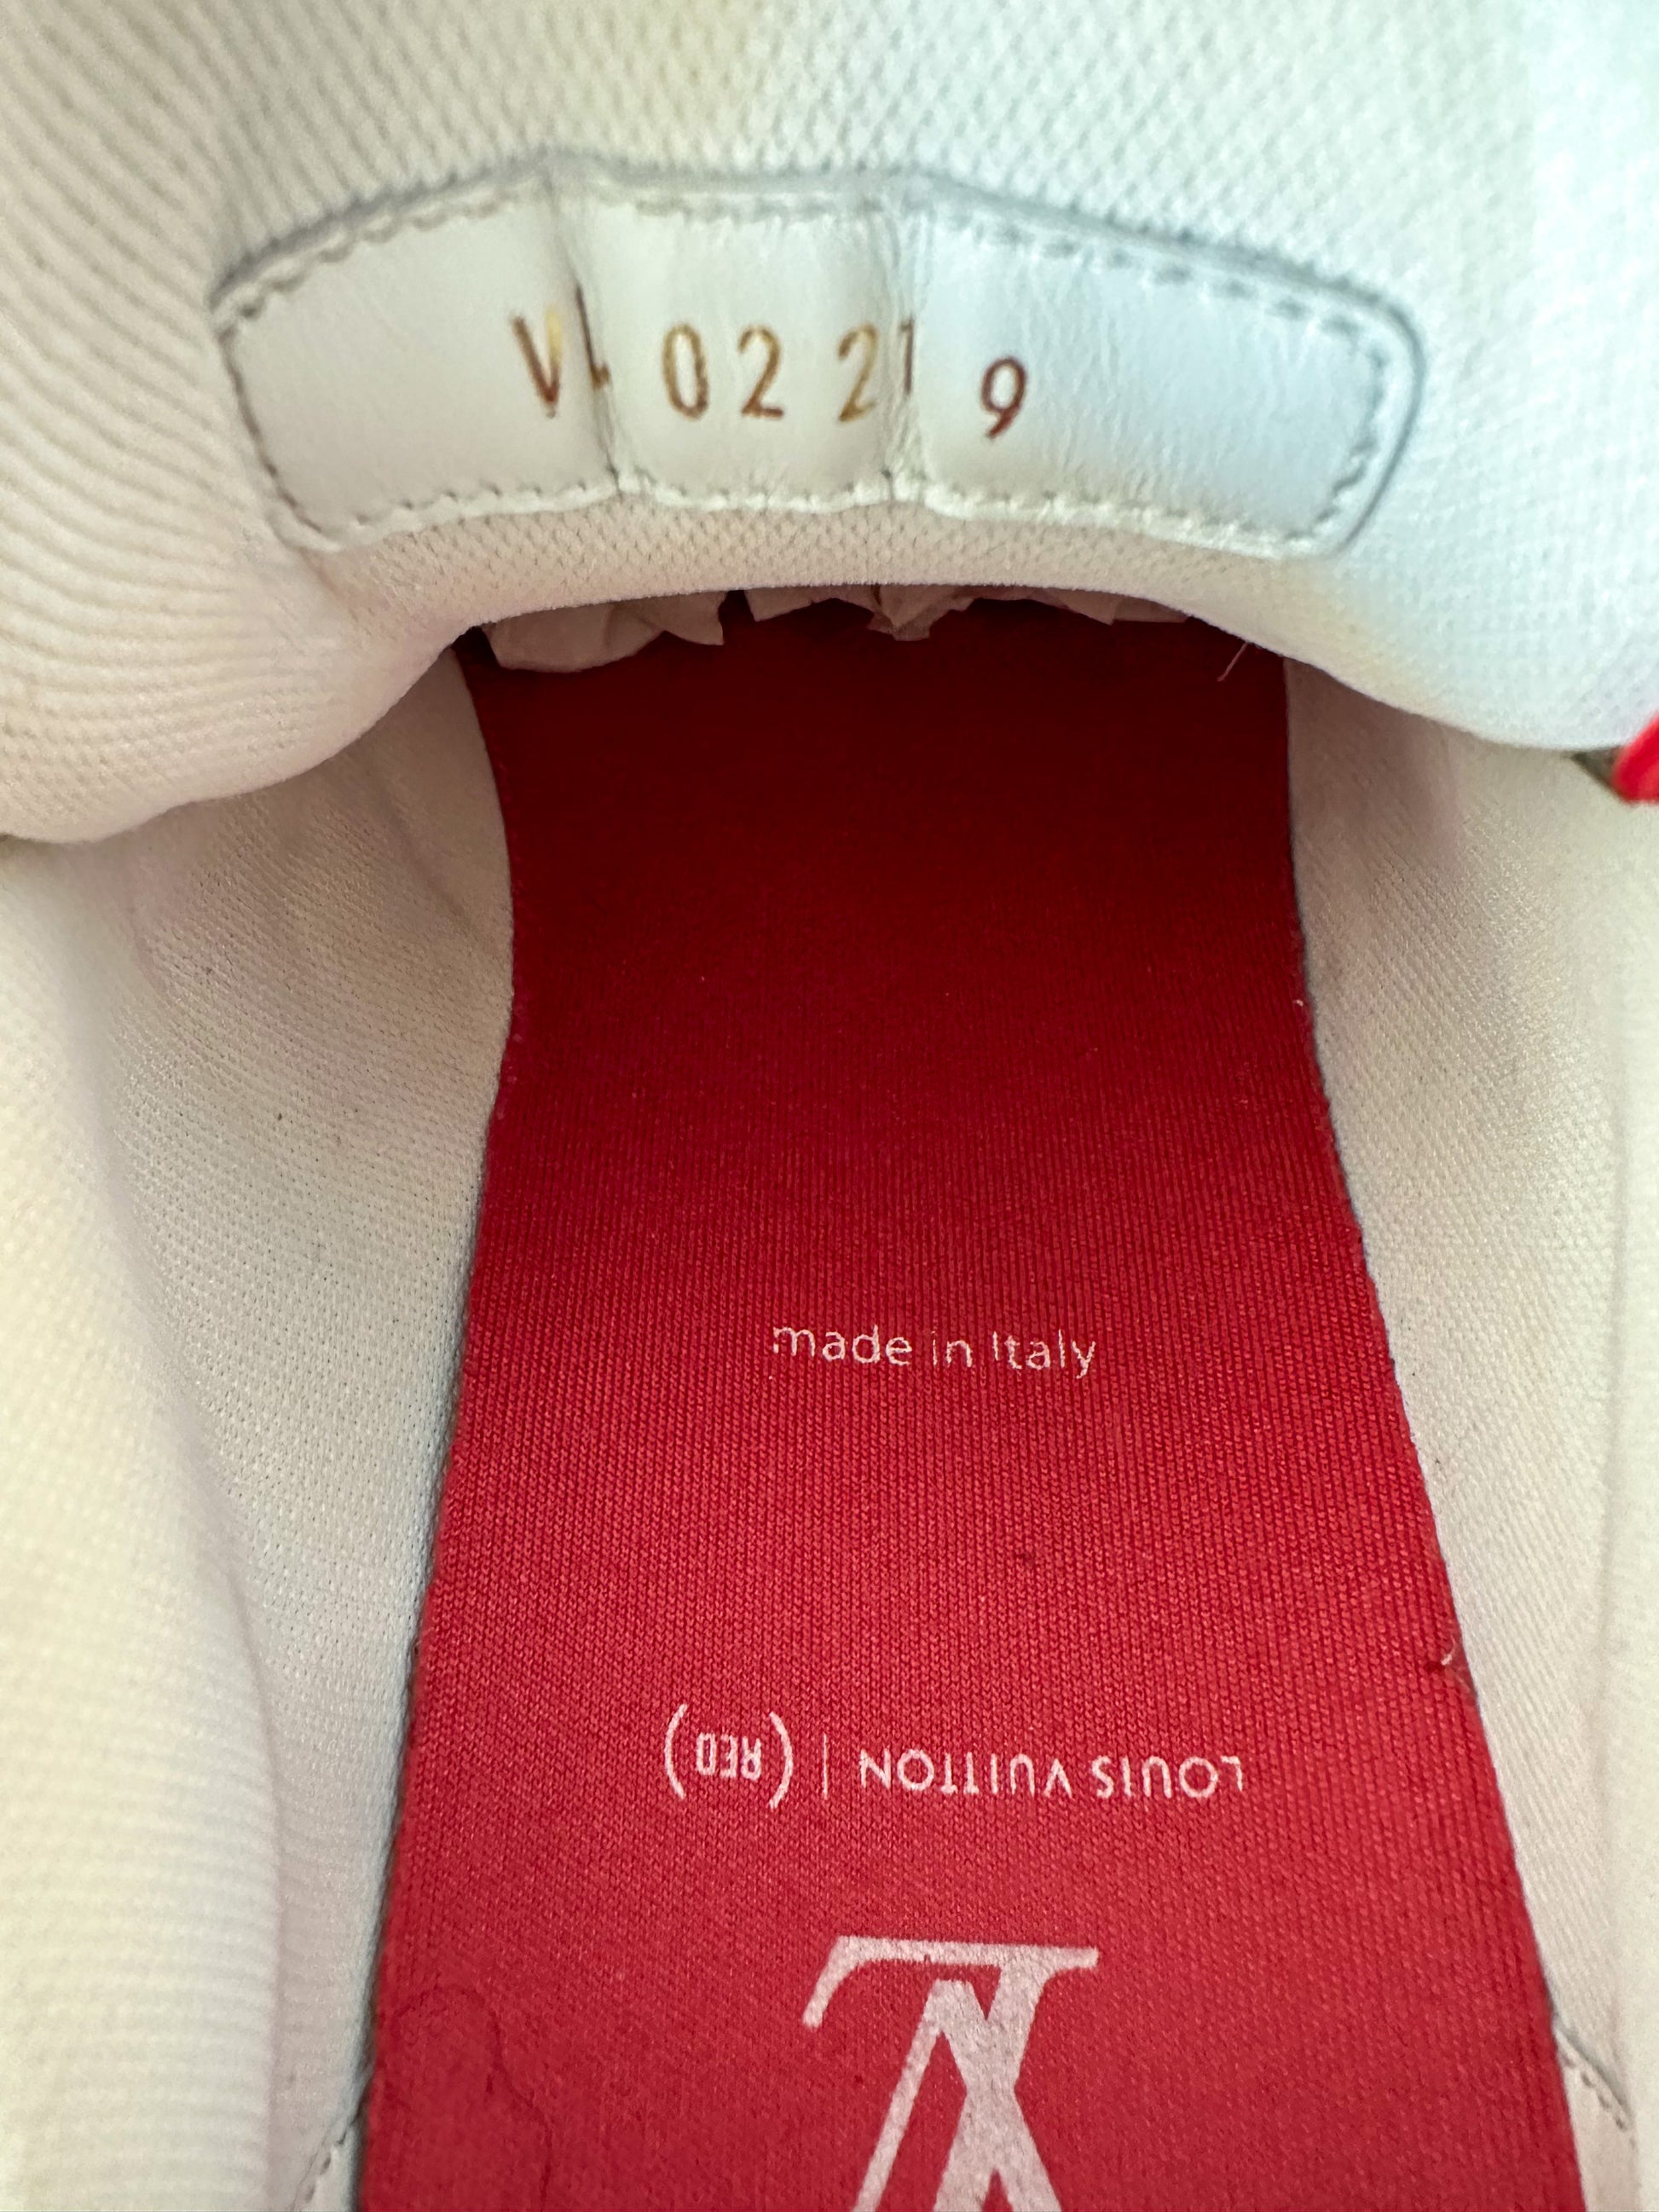 Louis Vuitton Product Red & White Monogram Trainers – Savonches